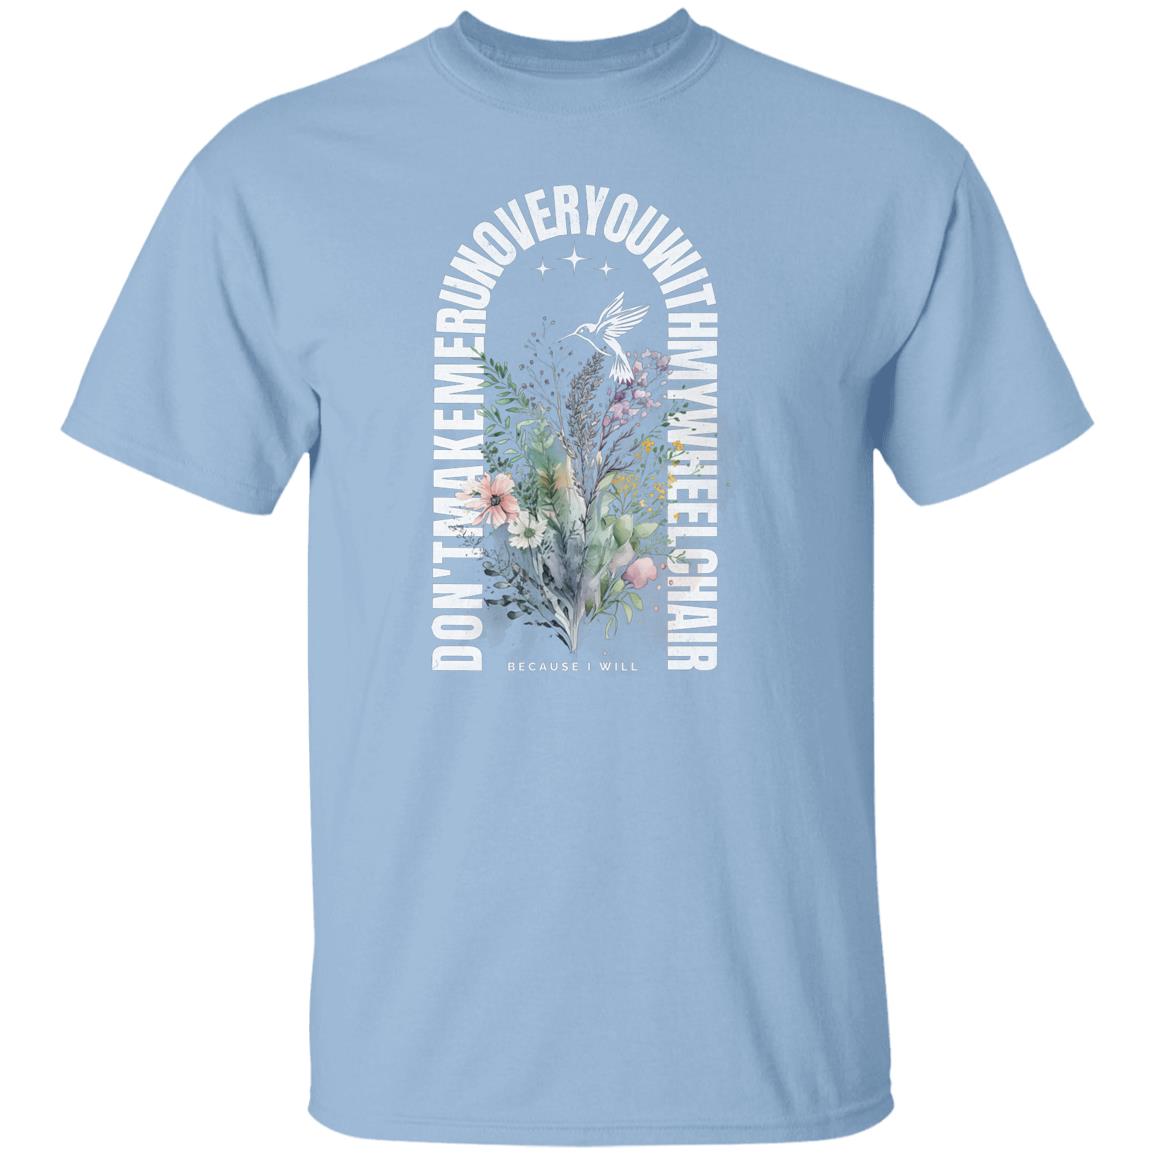 Jesus wouldn't but I will T-Shirt with Flowers - Expressive DeZien 